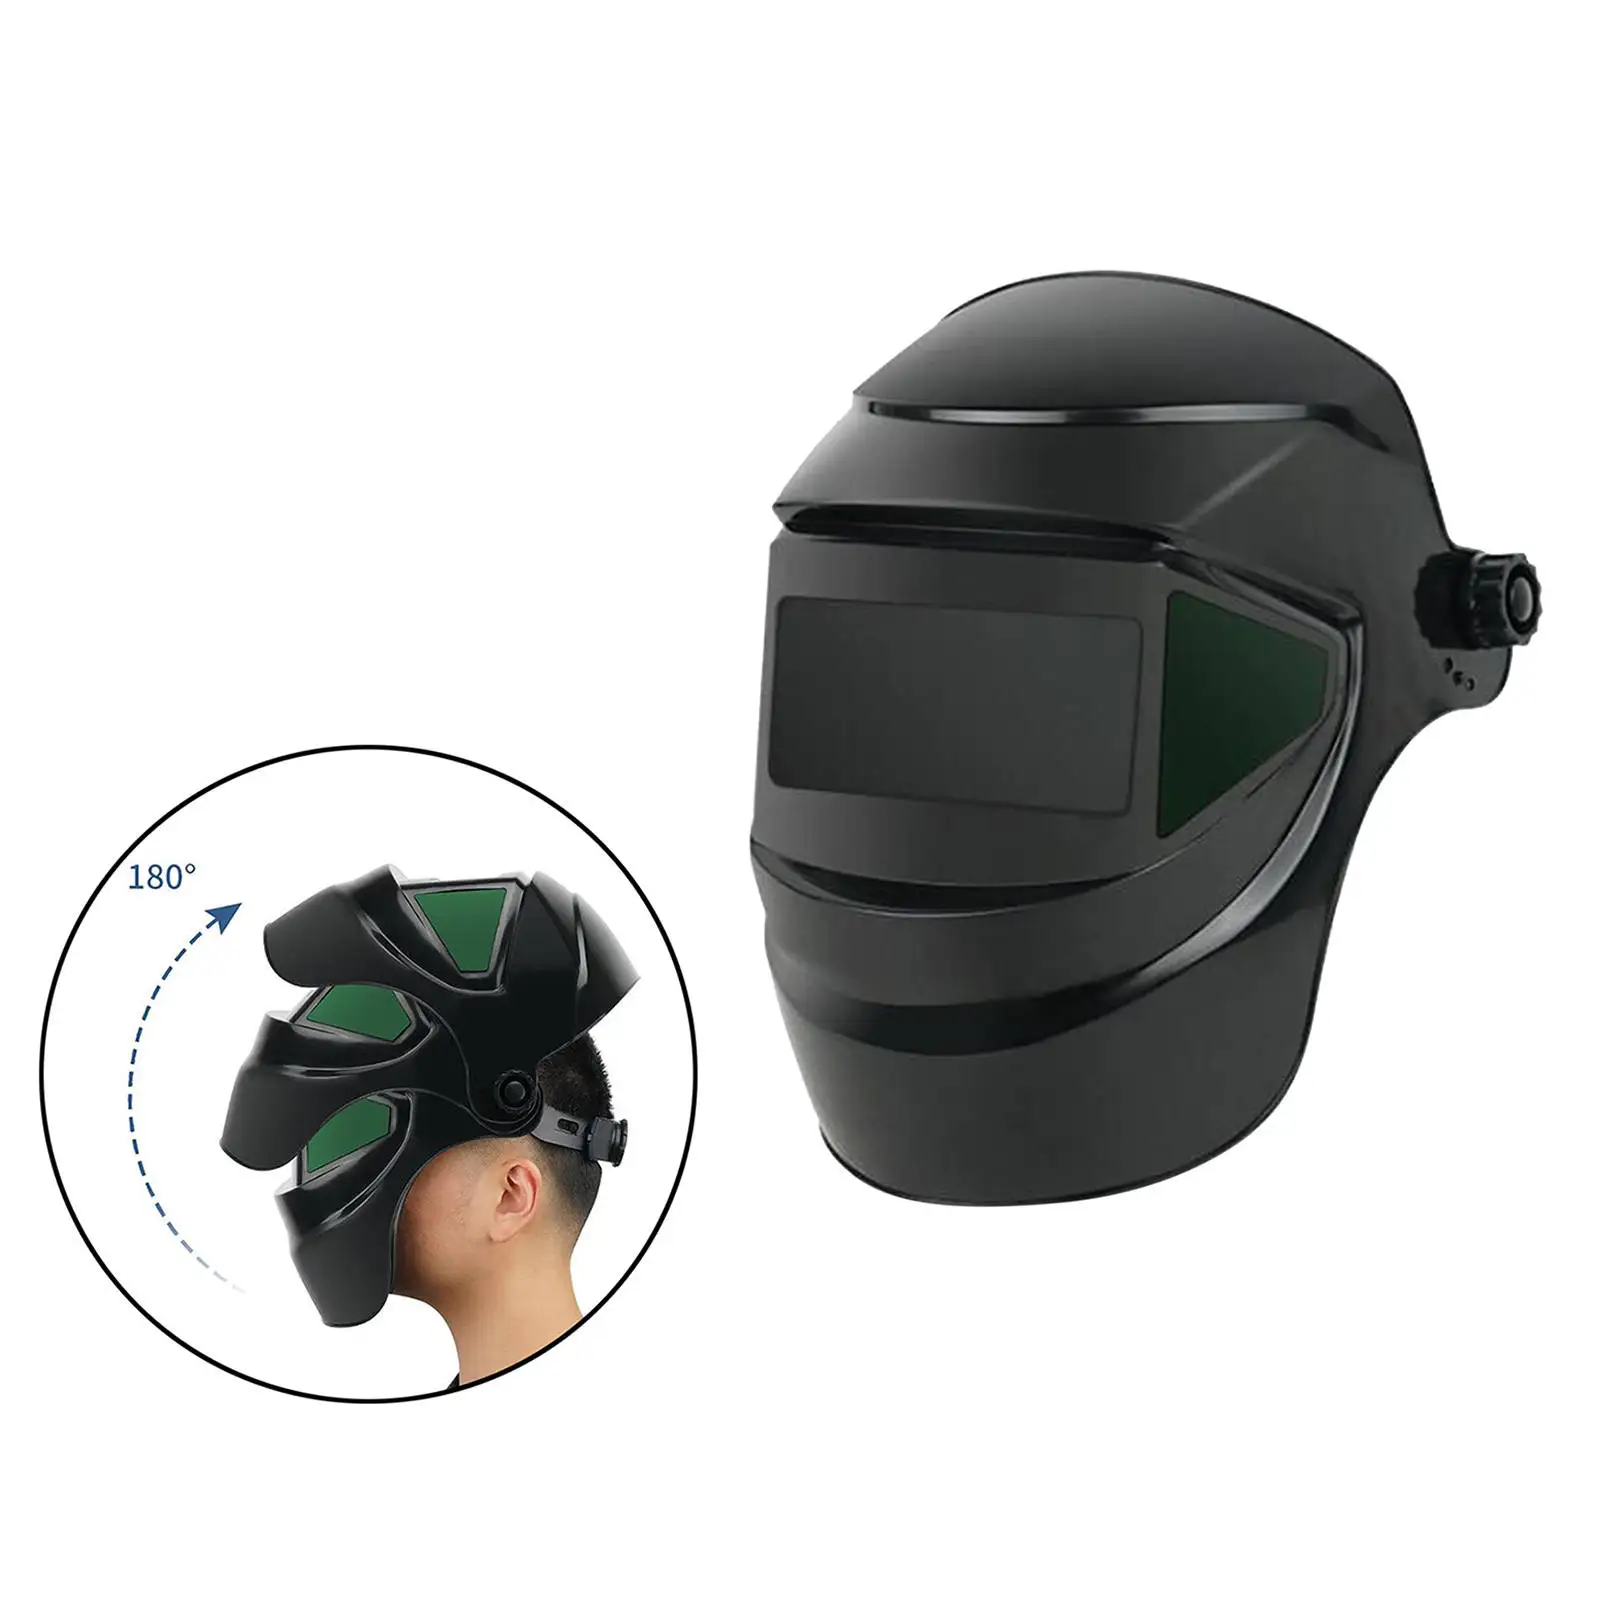 s Large View True Color Welding Helmet Mask   Shade Eyes Goggles Protector Power Grinding, Black